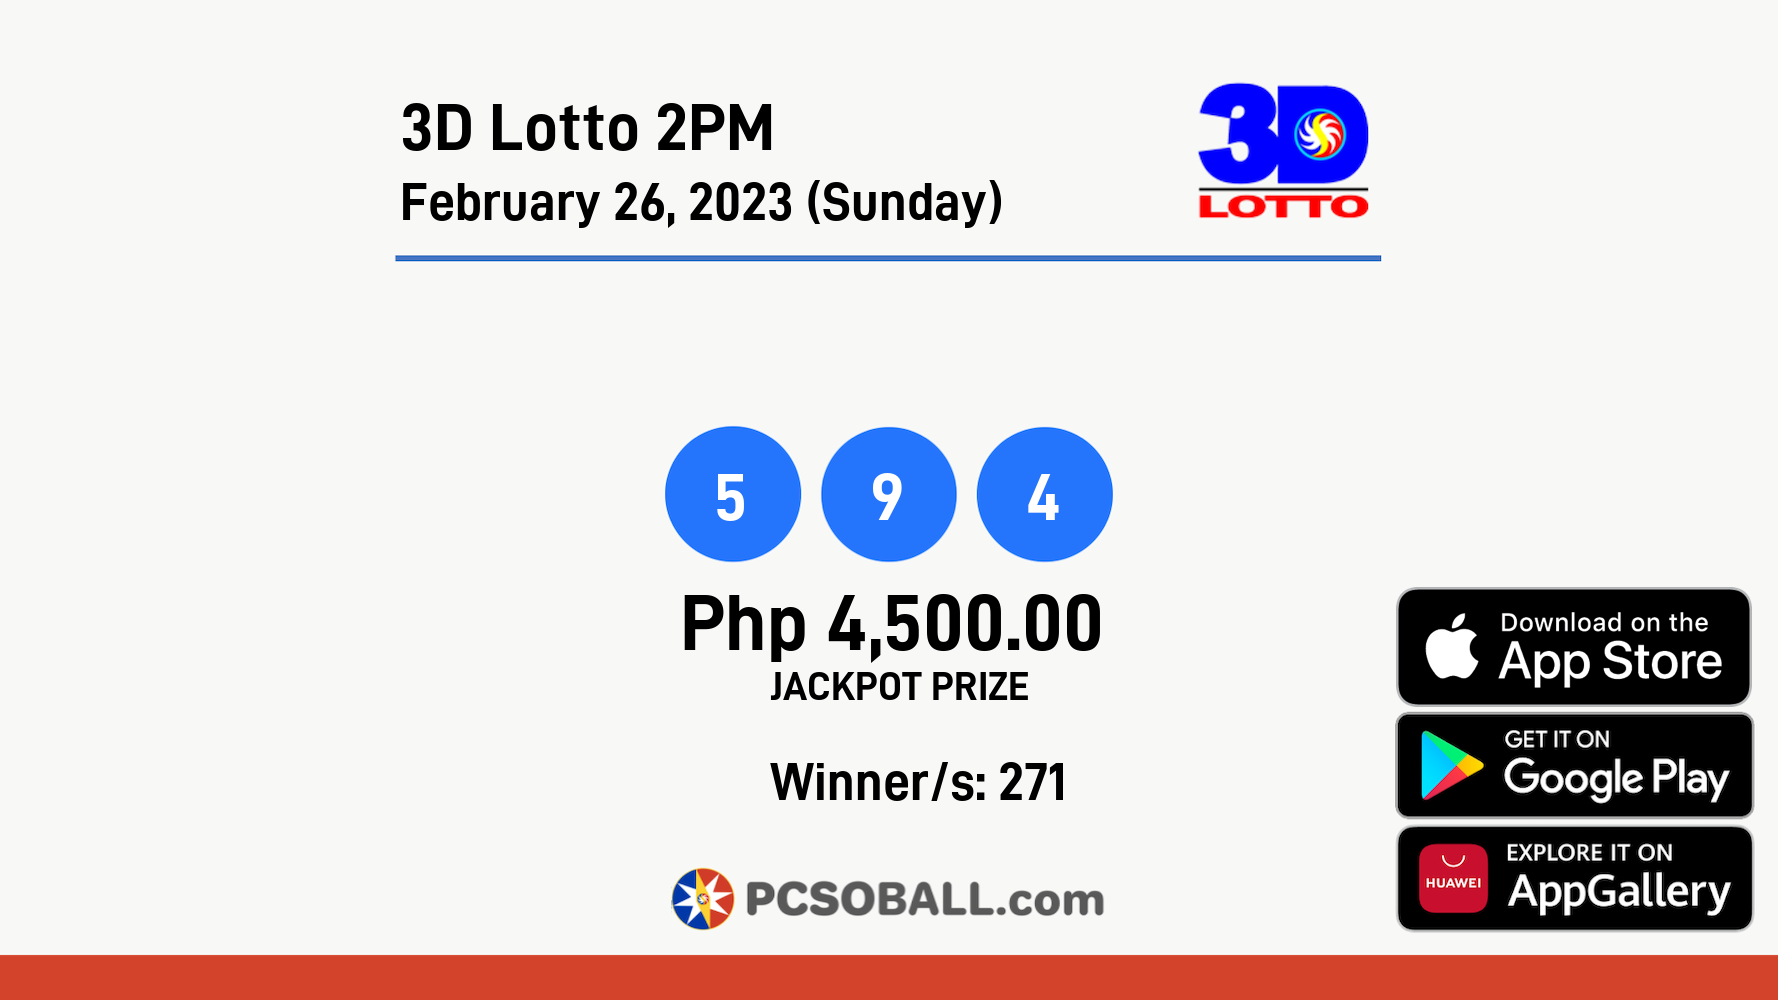 3D Lotto 2PM February 26, 2023 (Sunday) Result